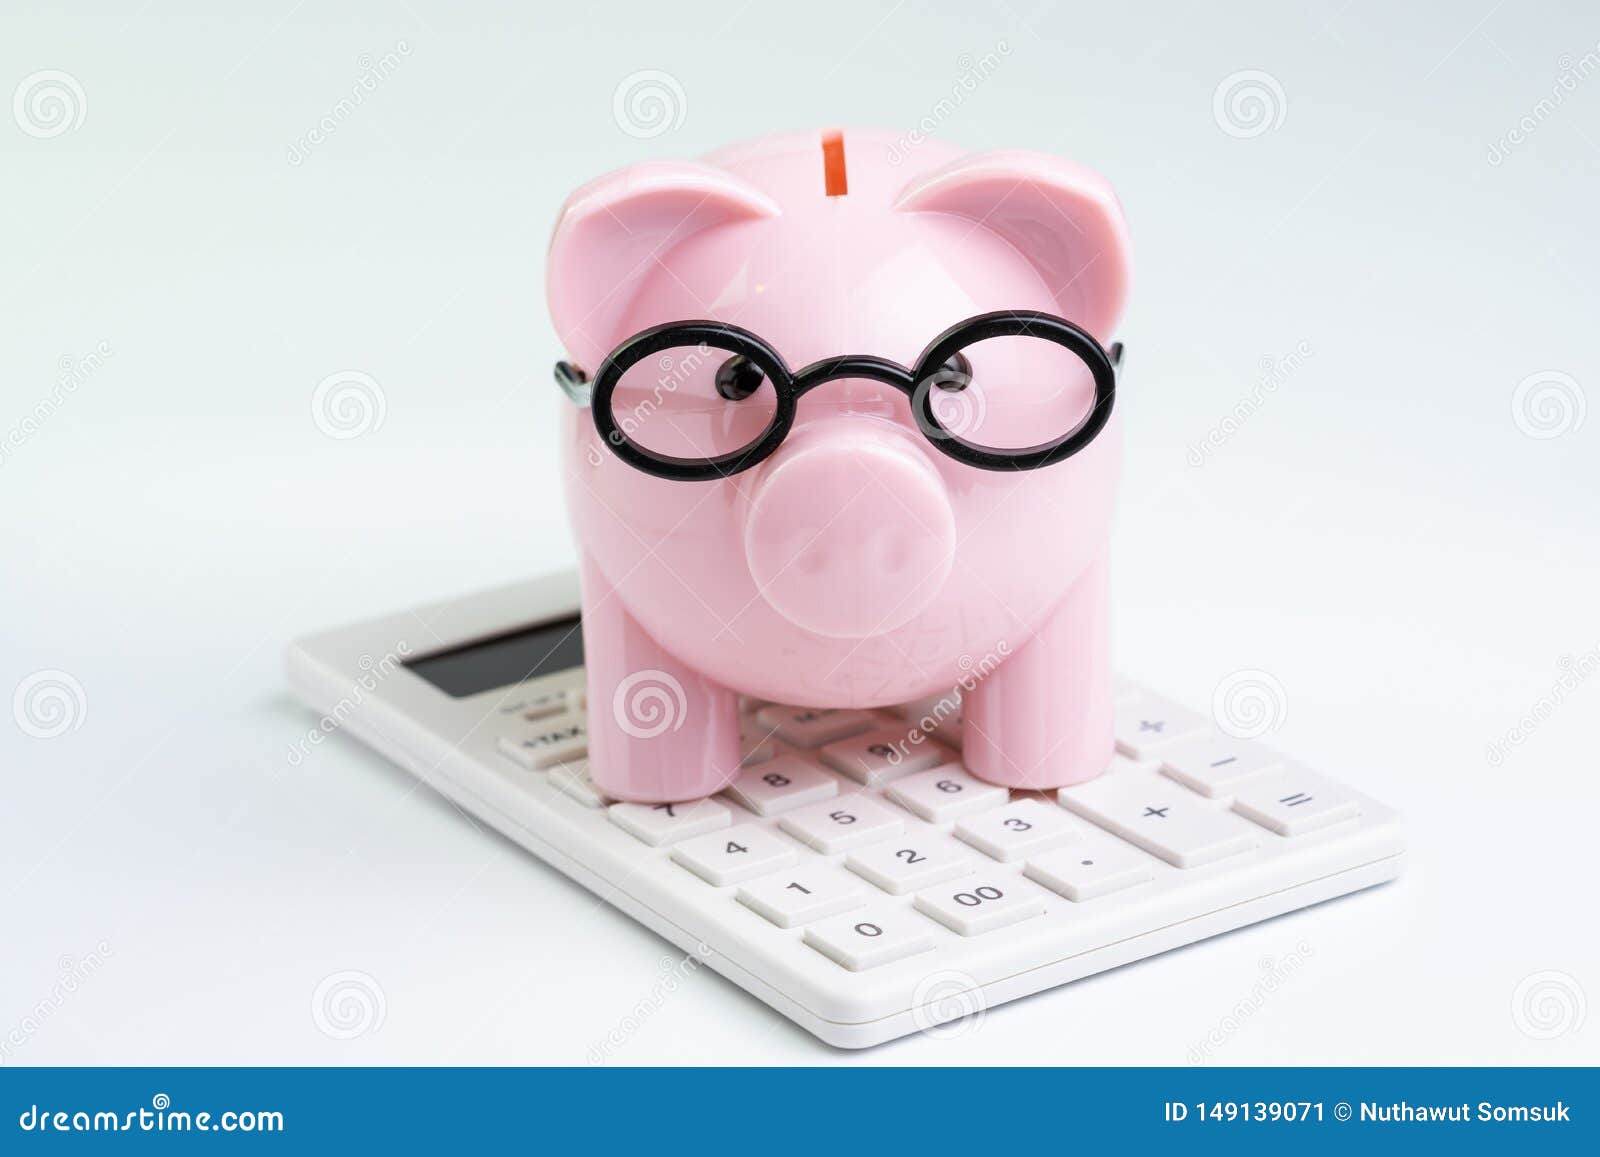 budget, cost or investment calculation and financial activity concept, pink piggy bank wearing glasses on white calculator on